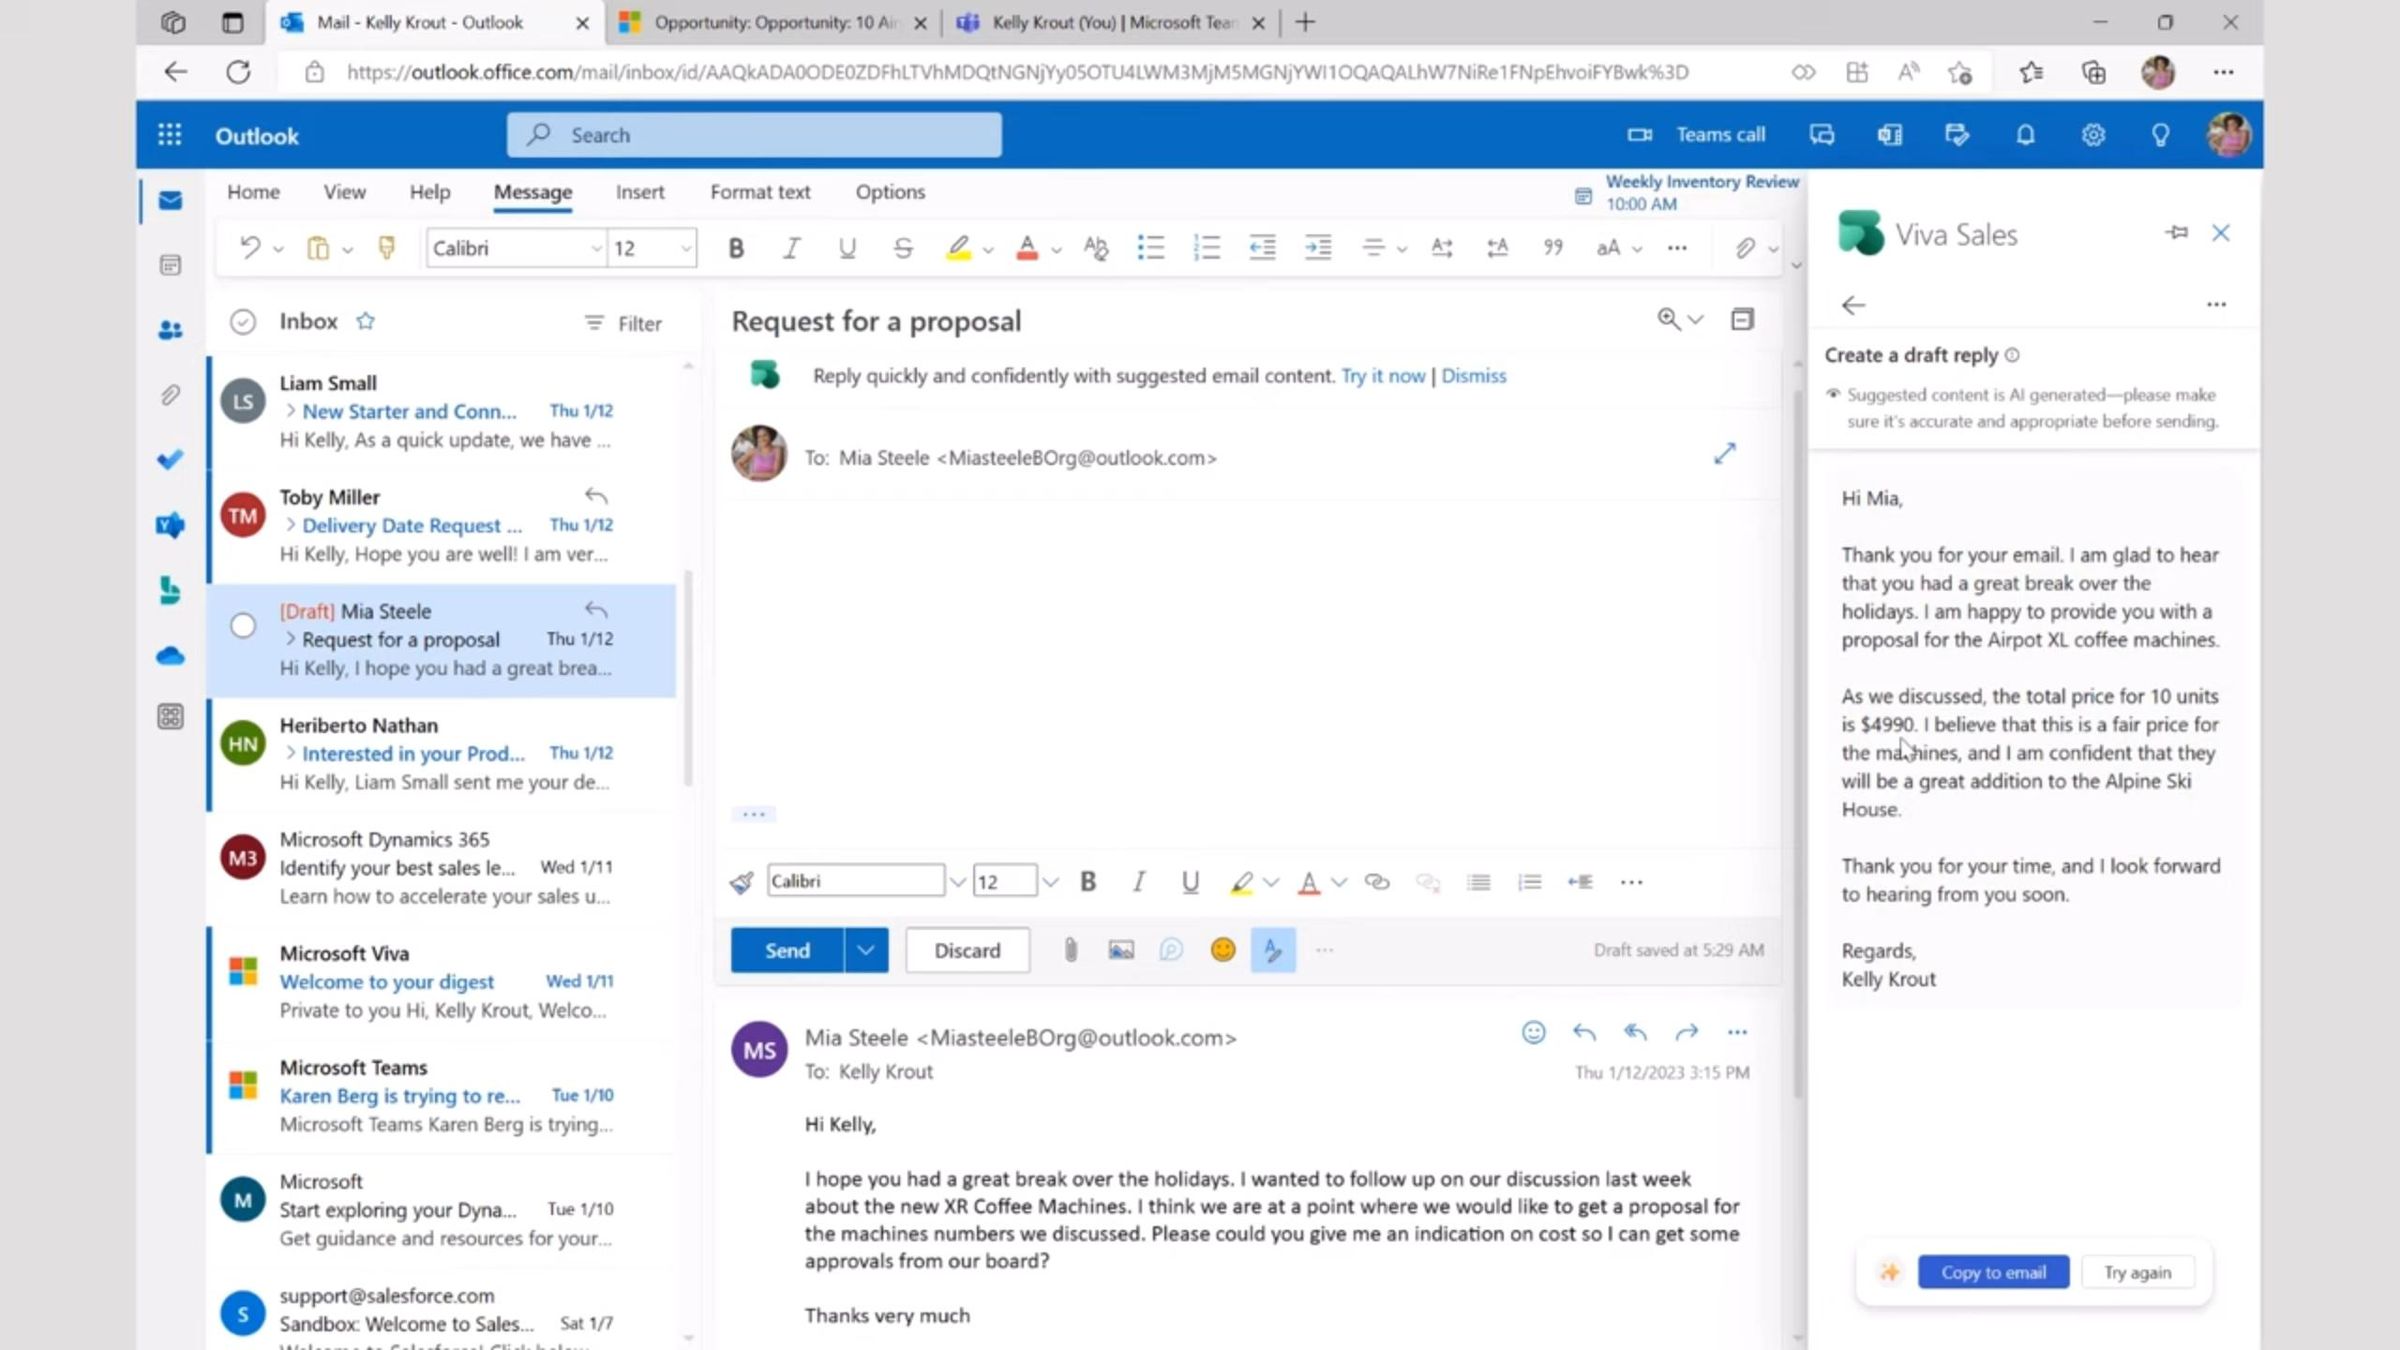 Microsoft to demo its new ChatGPT-like AI in Word, PowerPoint, and Outlook soon